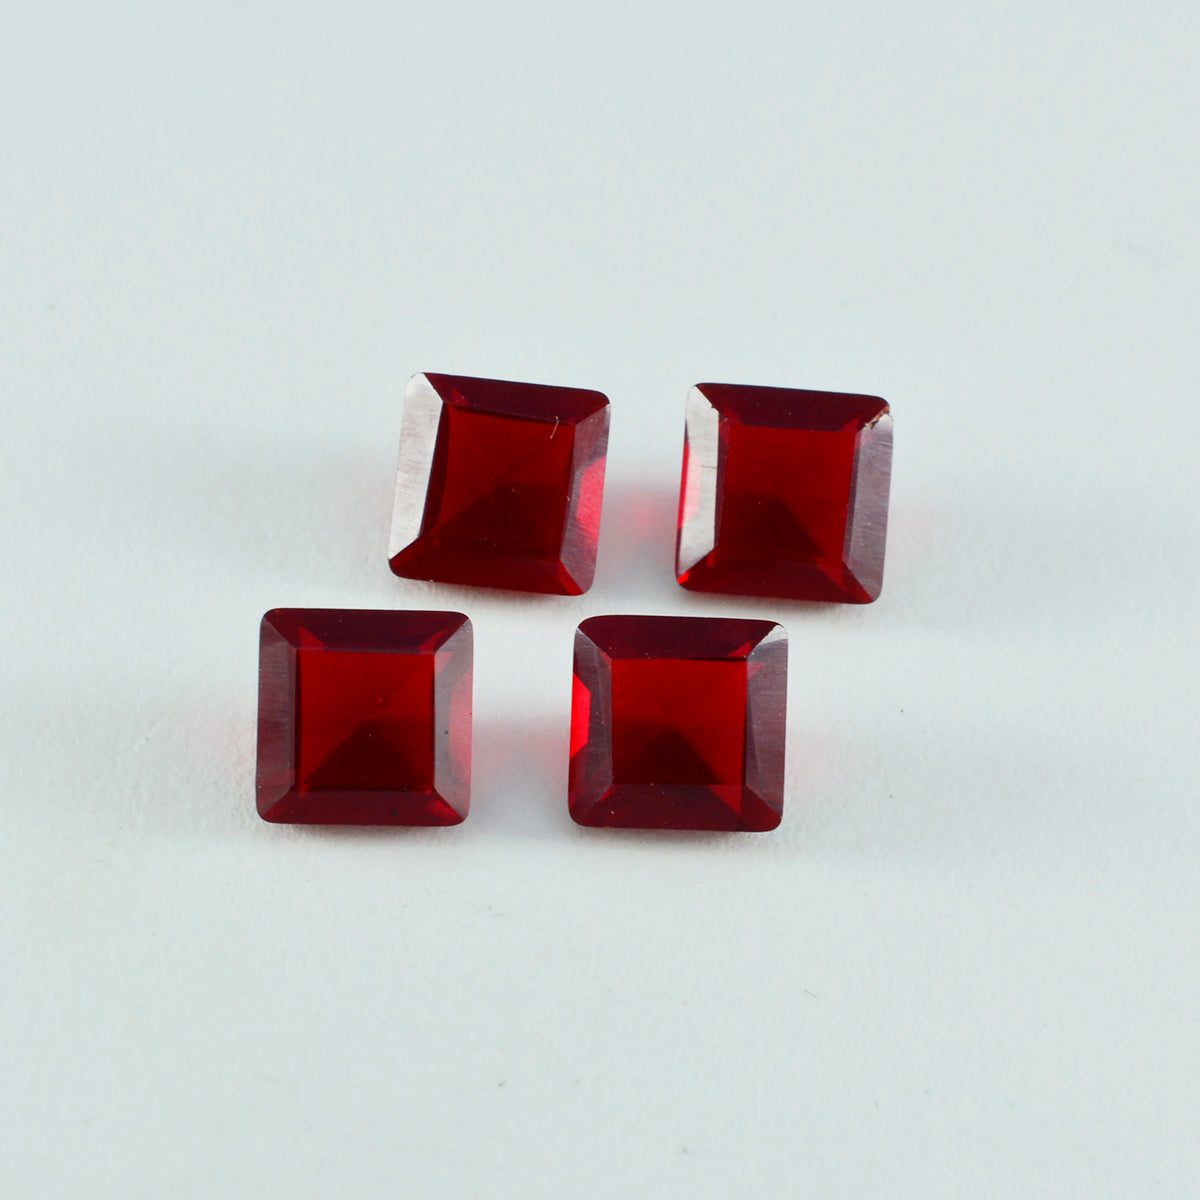 Riyogems 1PC Red Ruby CZ Faceted 10x10 mm Square Shape sweet Quality Loose Gems